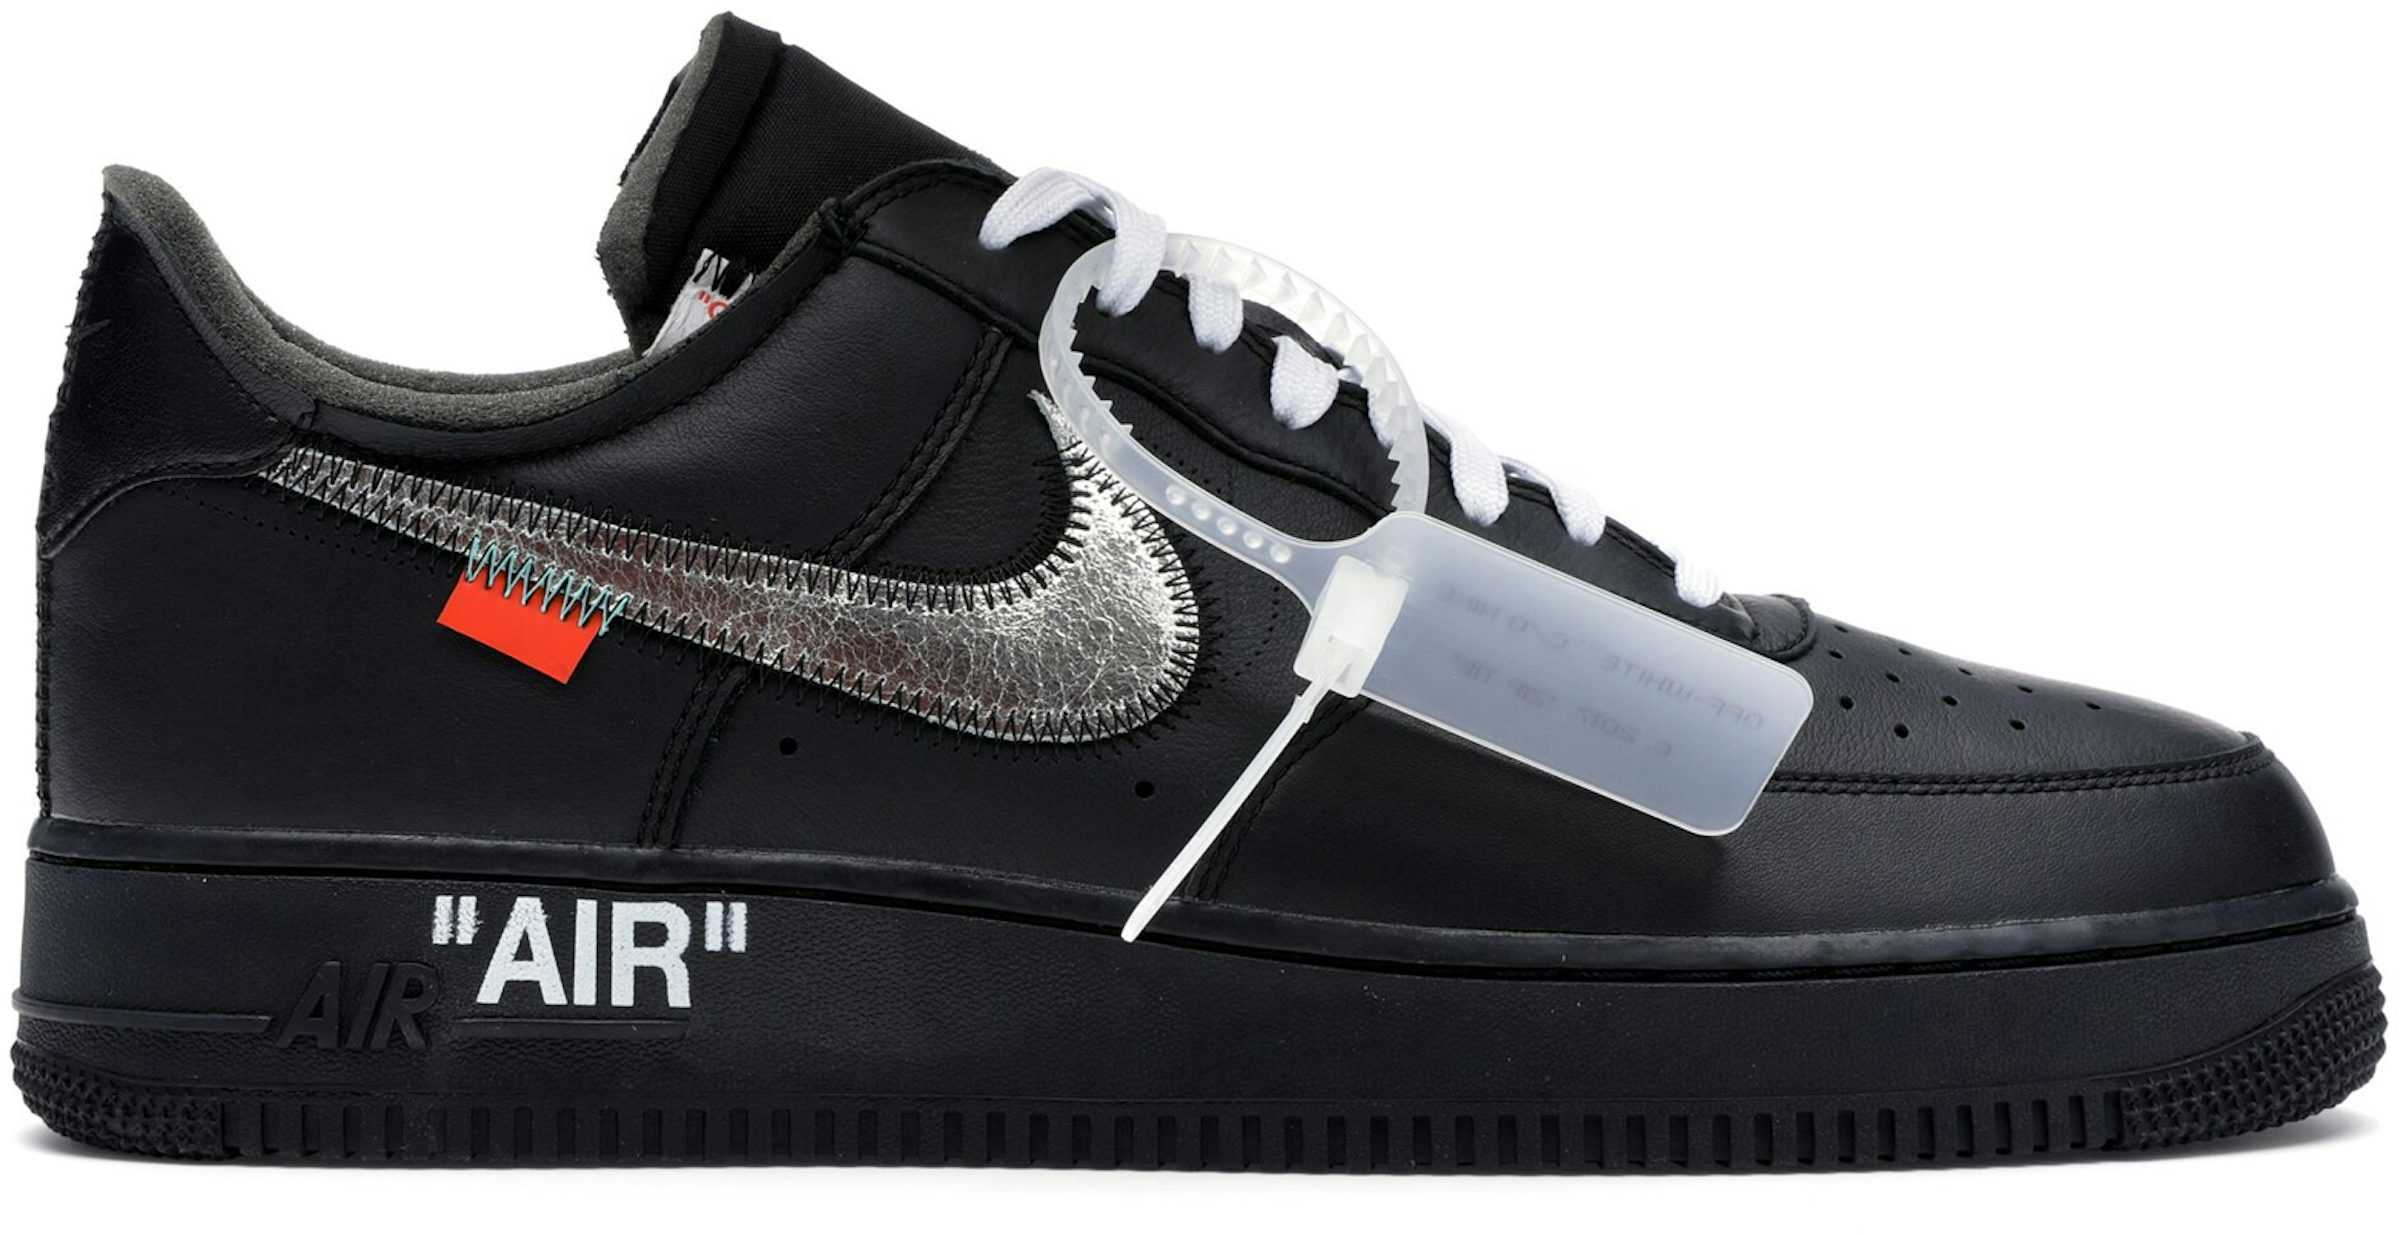 Nike's AF100 collection marks 35 years of the Air Force 1 - Acquire